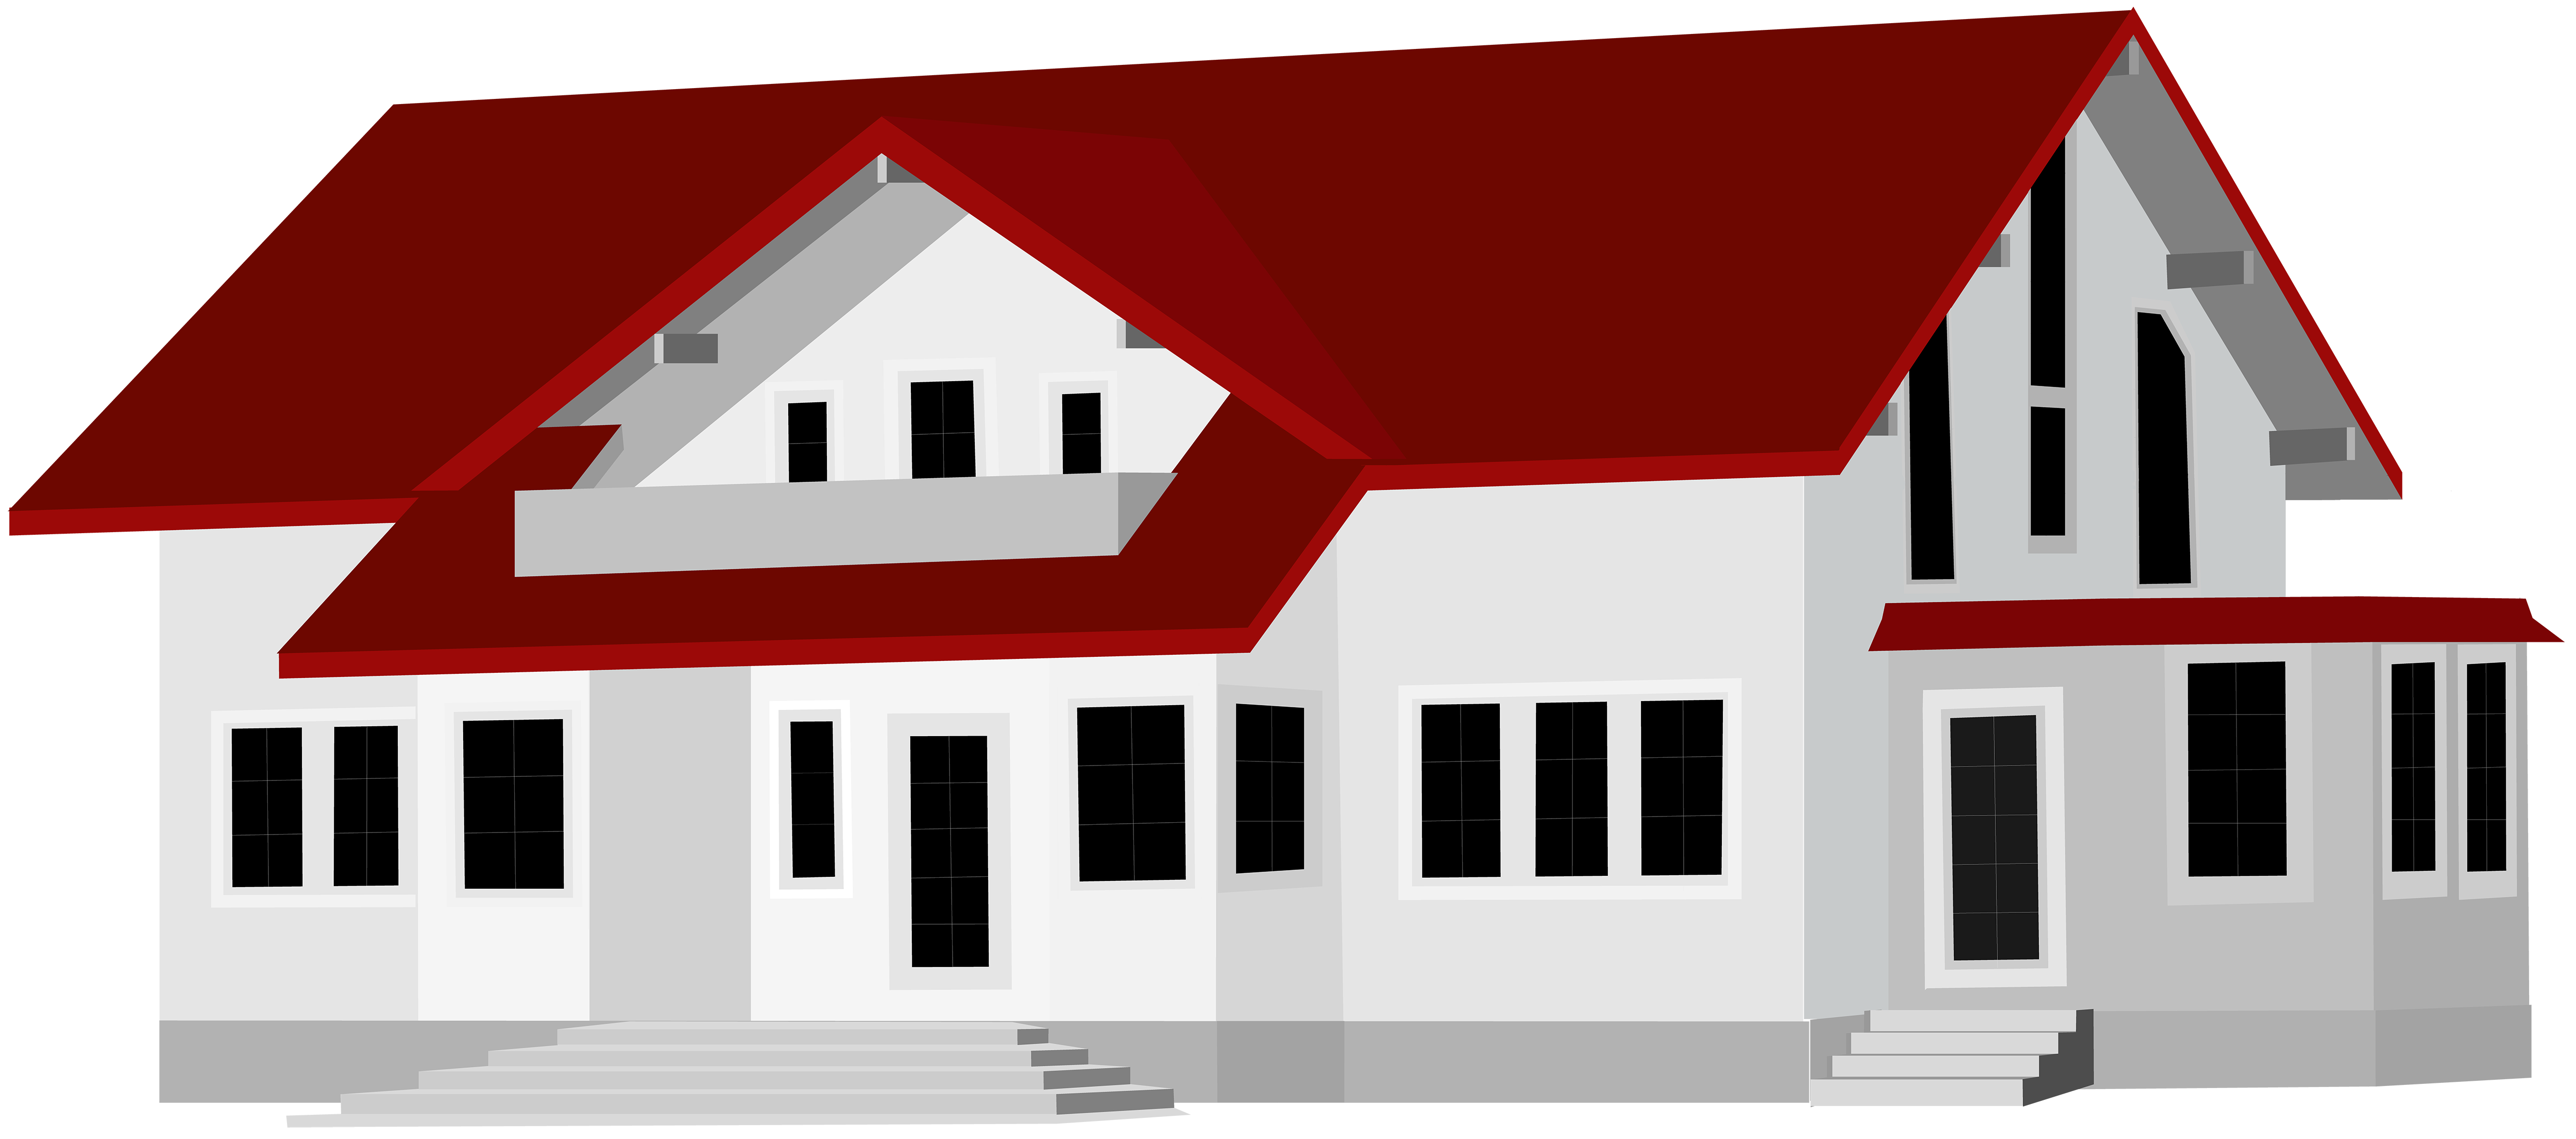 huge house clipart - photo #37